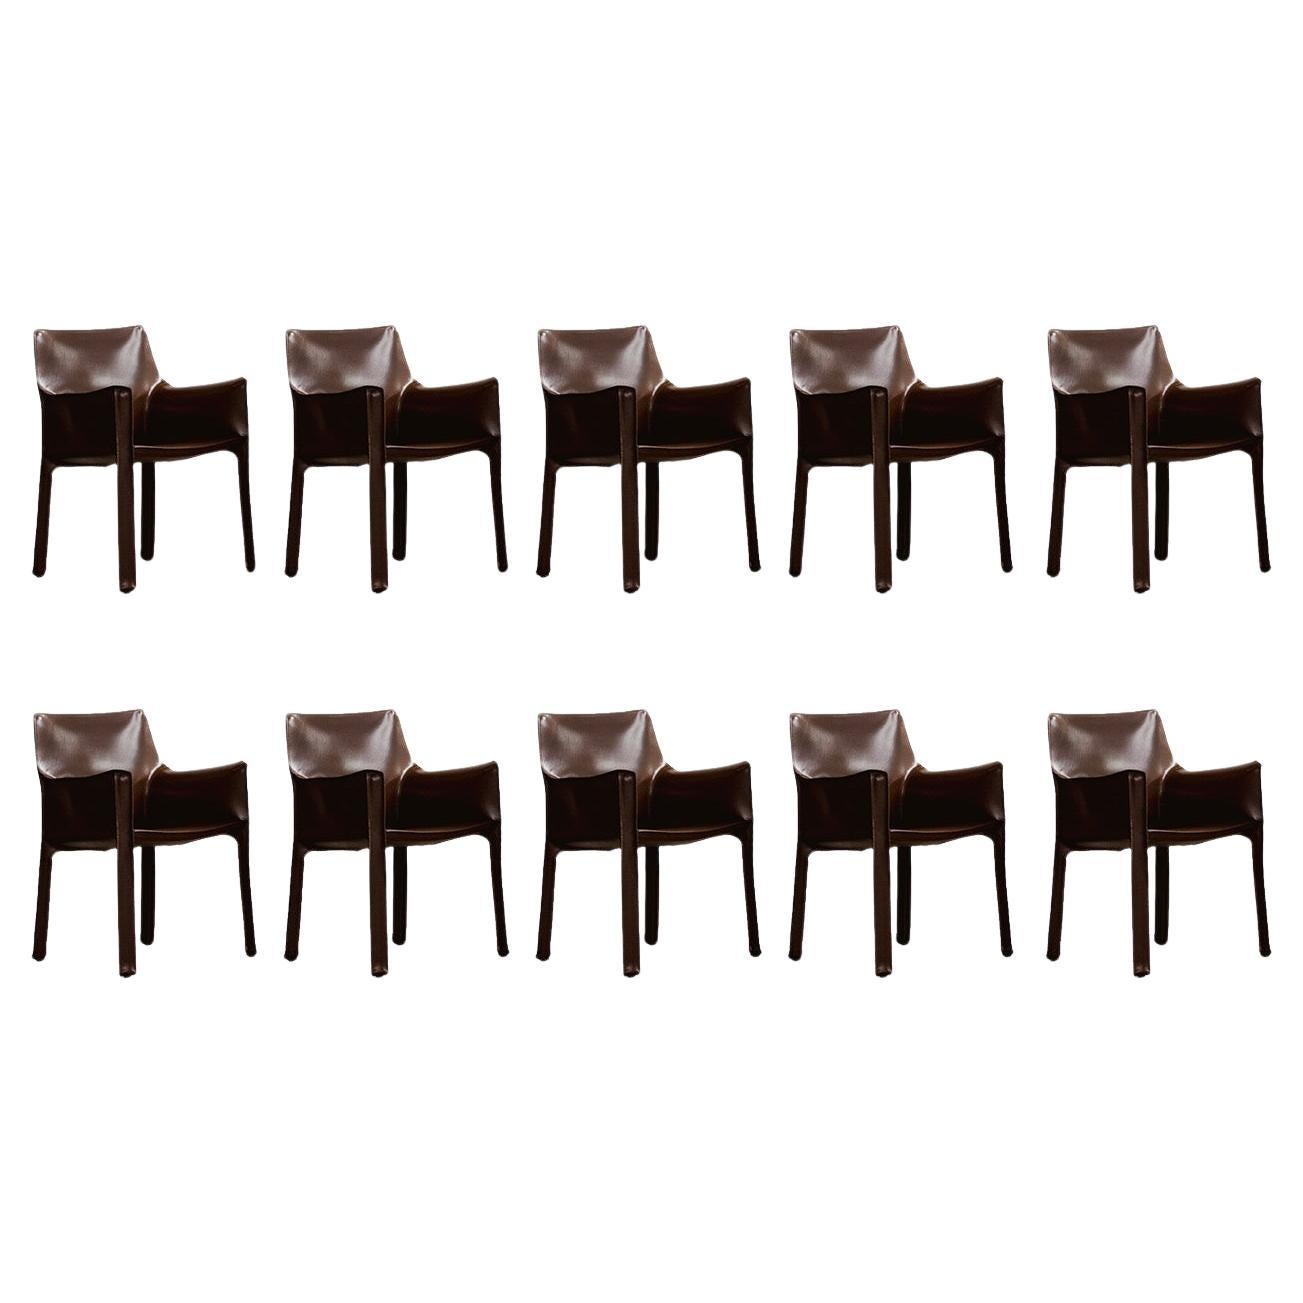 Mario Bellini "CAB 413" Chairs for Cassina in Dark Brown, 1977, Set of 10 For Sale